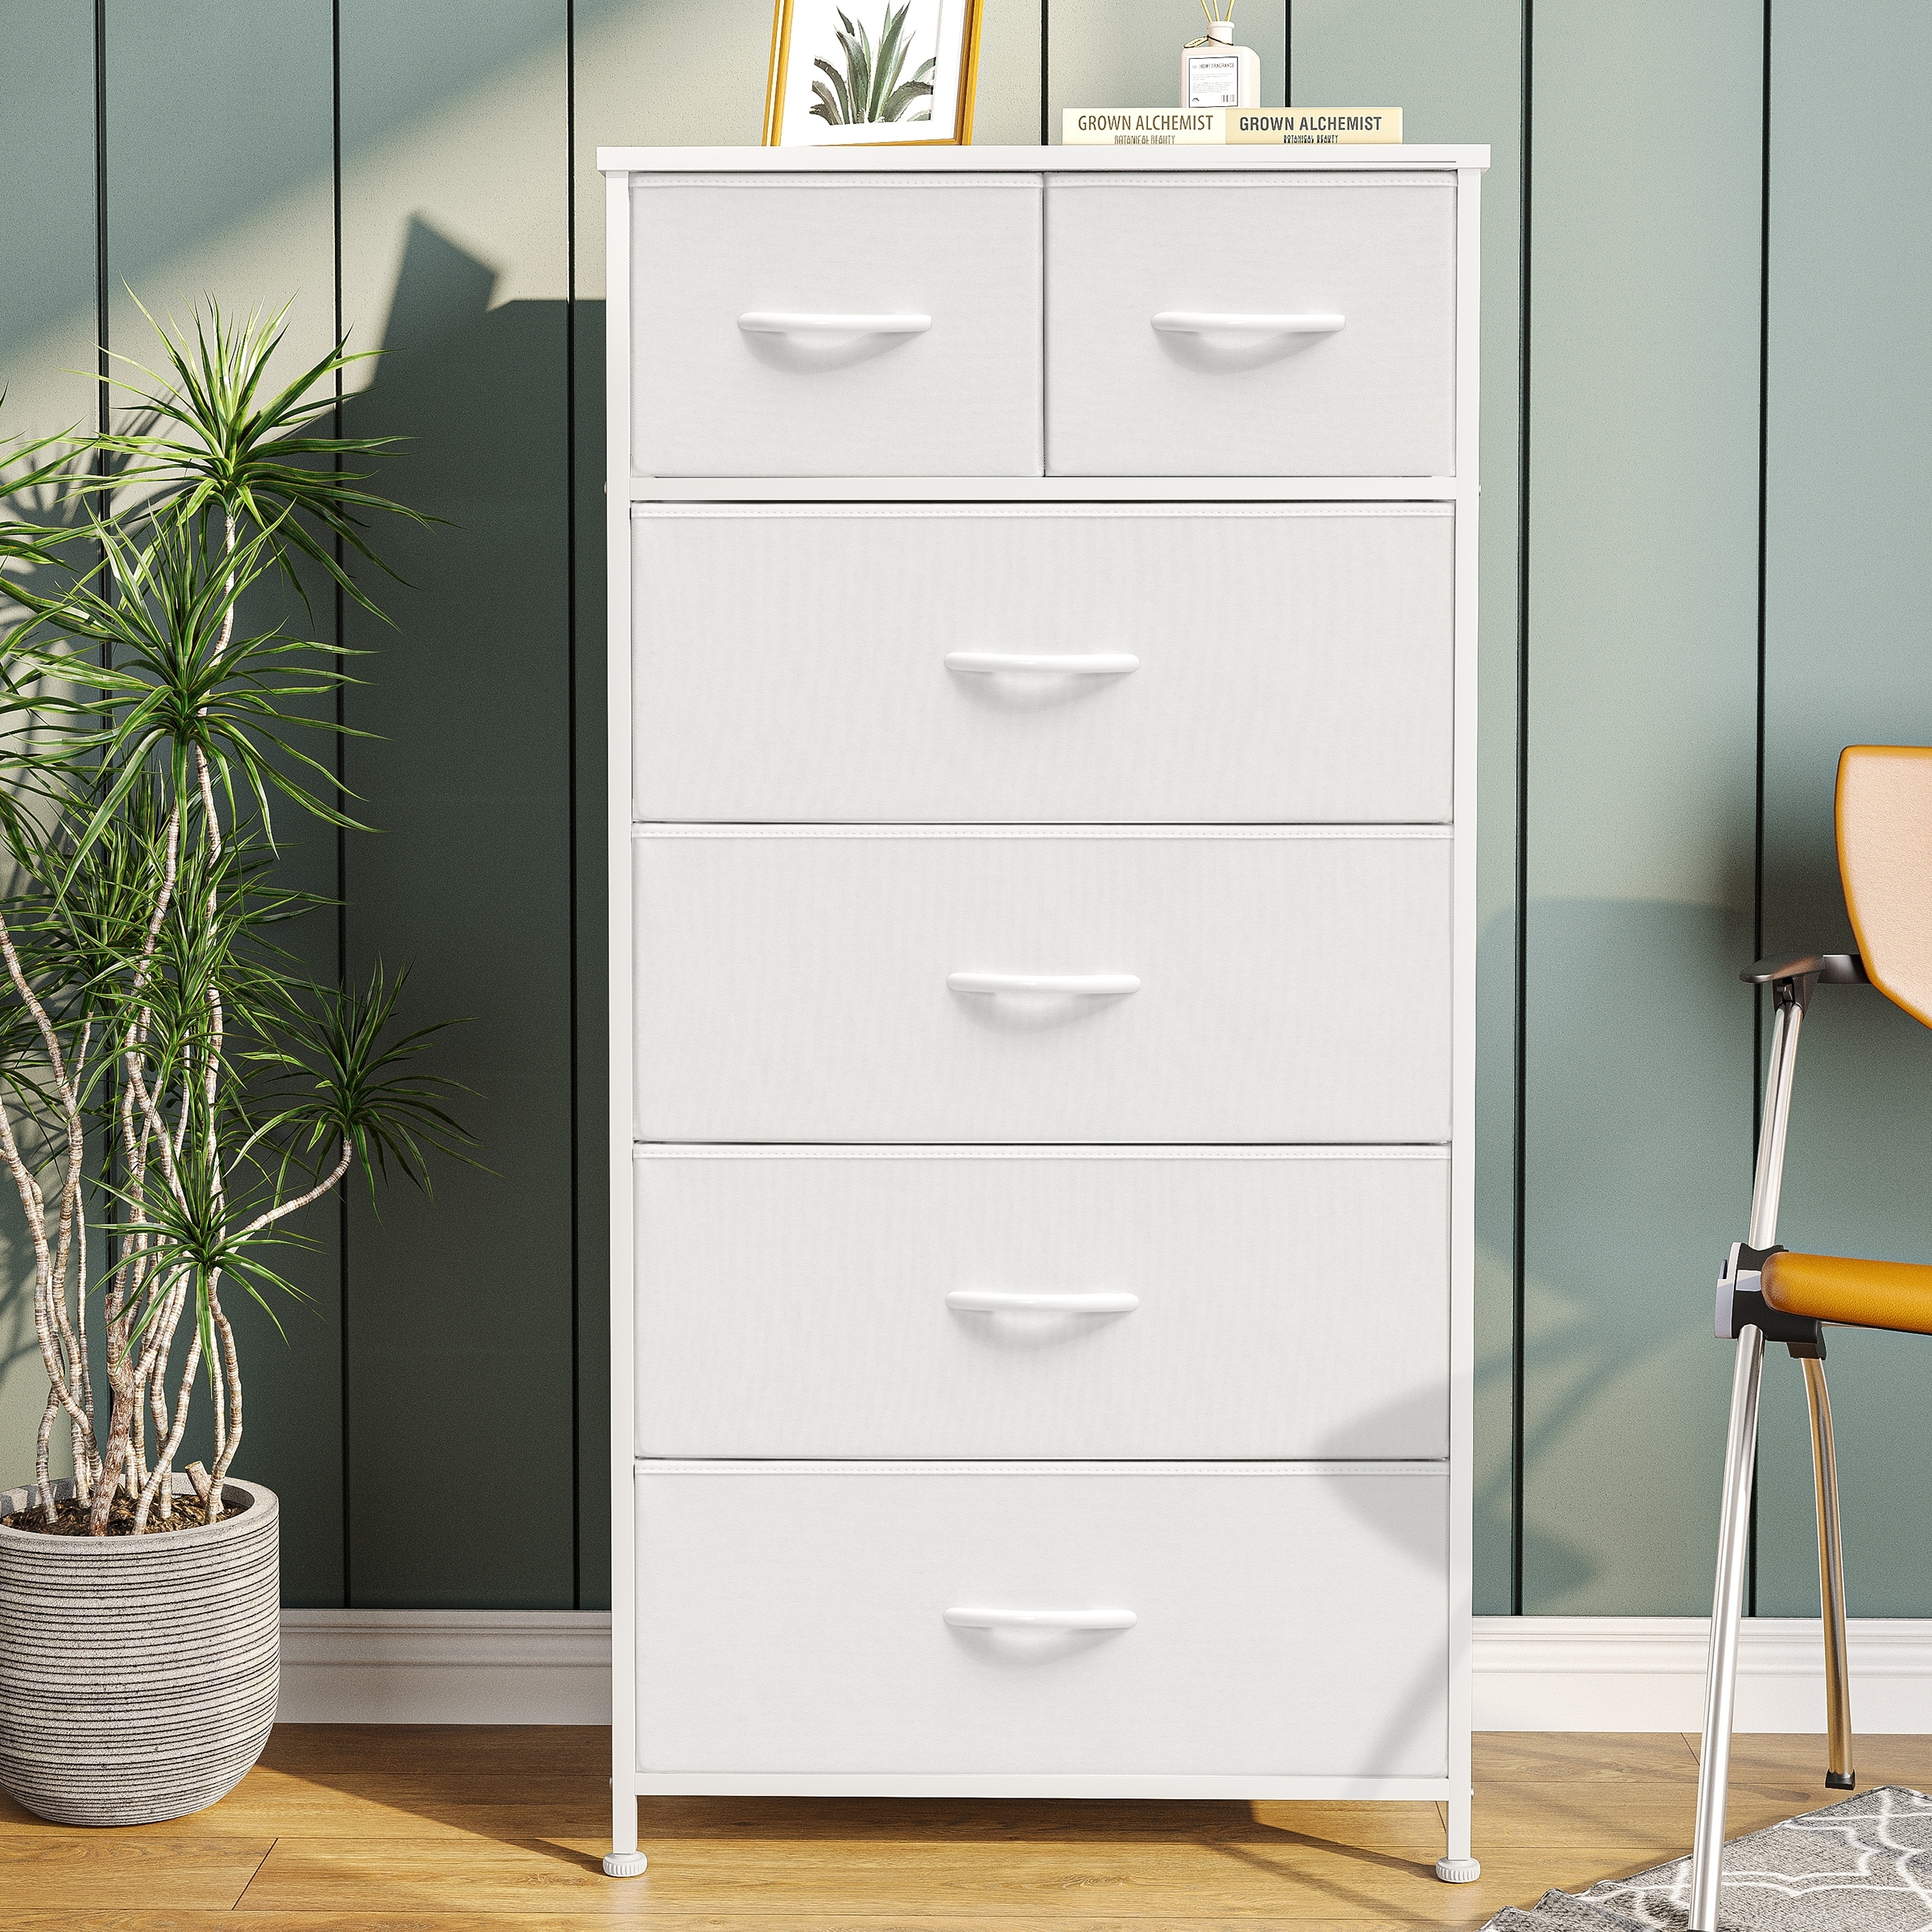 https://ak1.ostkcdn.com/images/products/is/images/direct/8ec84b991829b3bb2ea83a73d1f2c26fb35d13b9/Pellebant-Fabric-Vertical-Dresser-Storage-Tower-with-6-Drawers.jpg